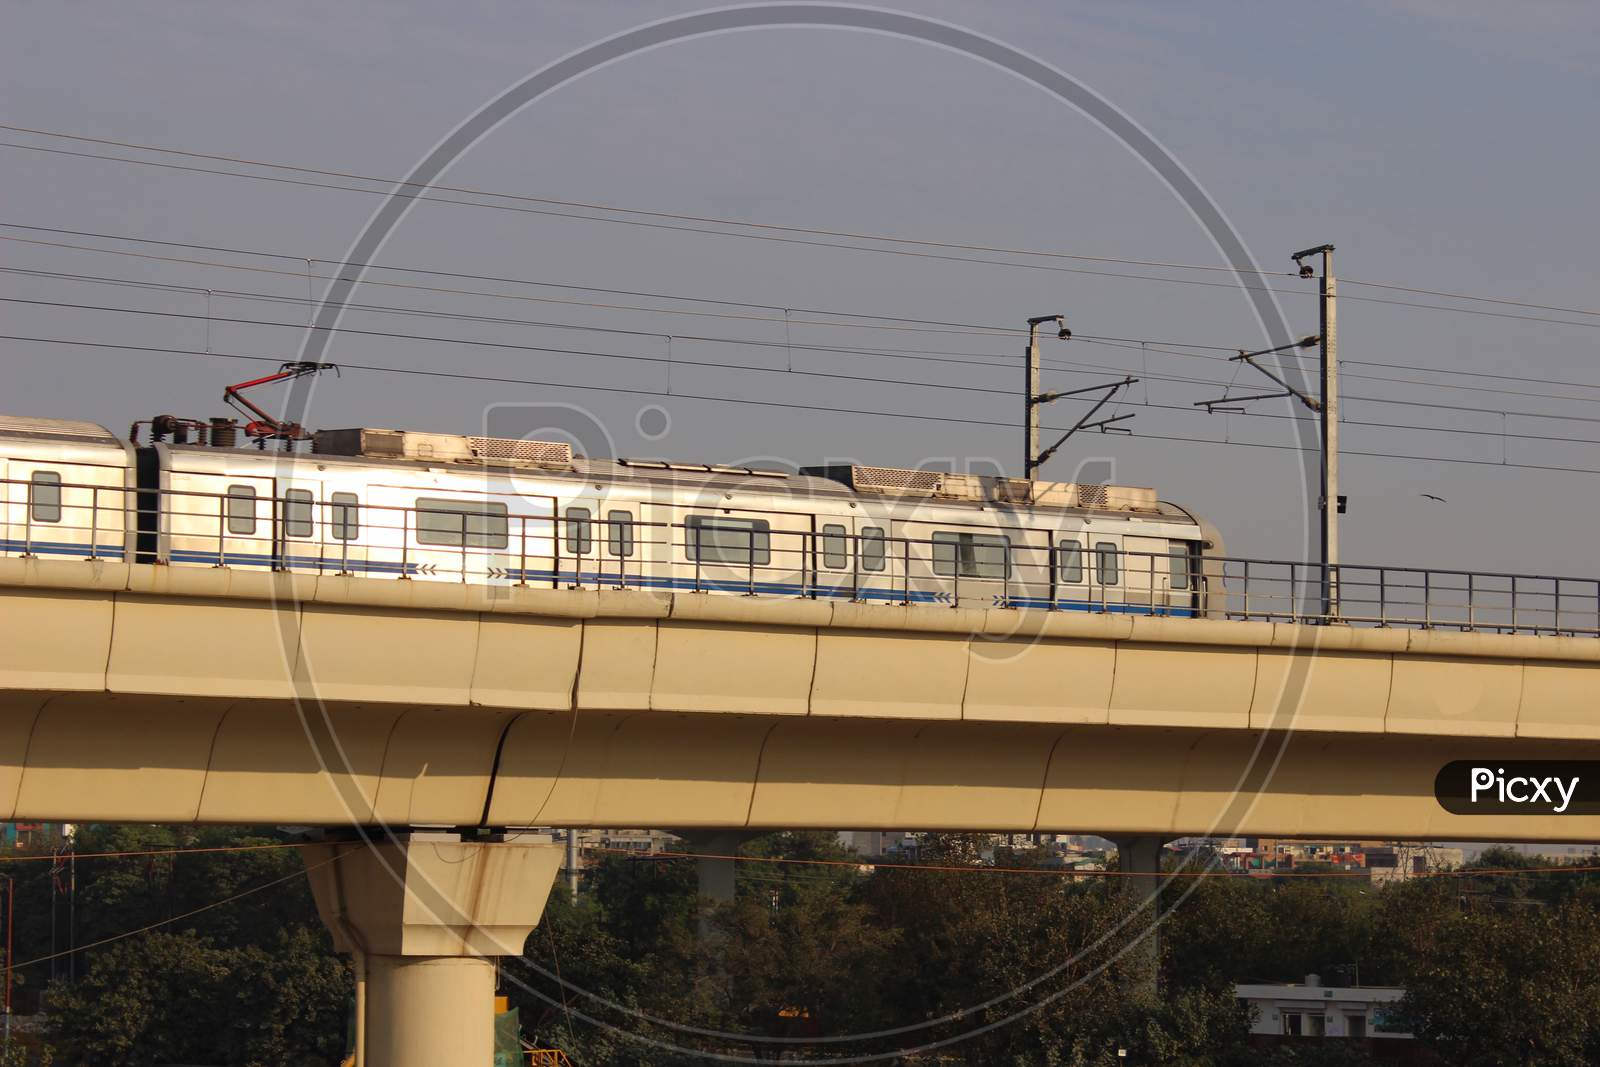 A Picture Of Indian Metro Train With Selective Focus